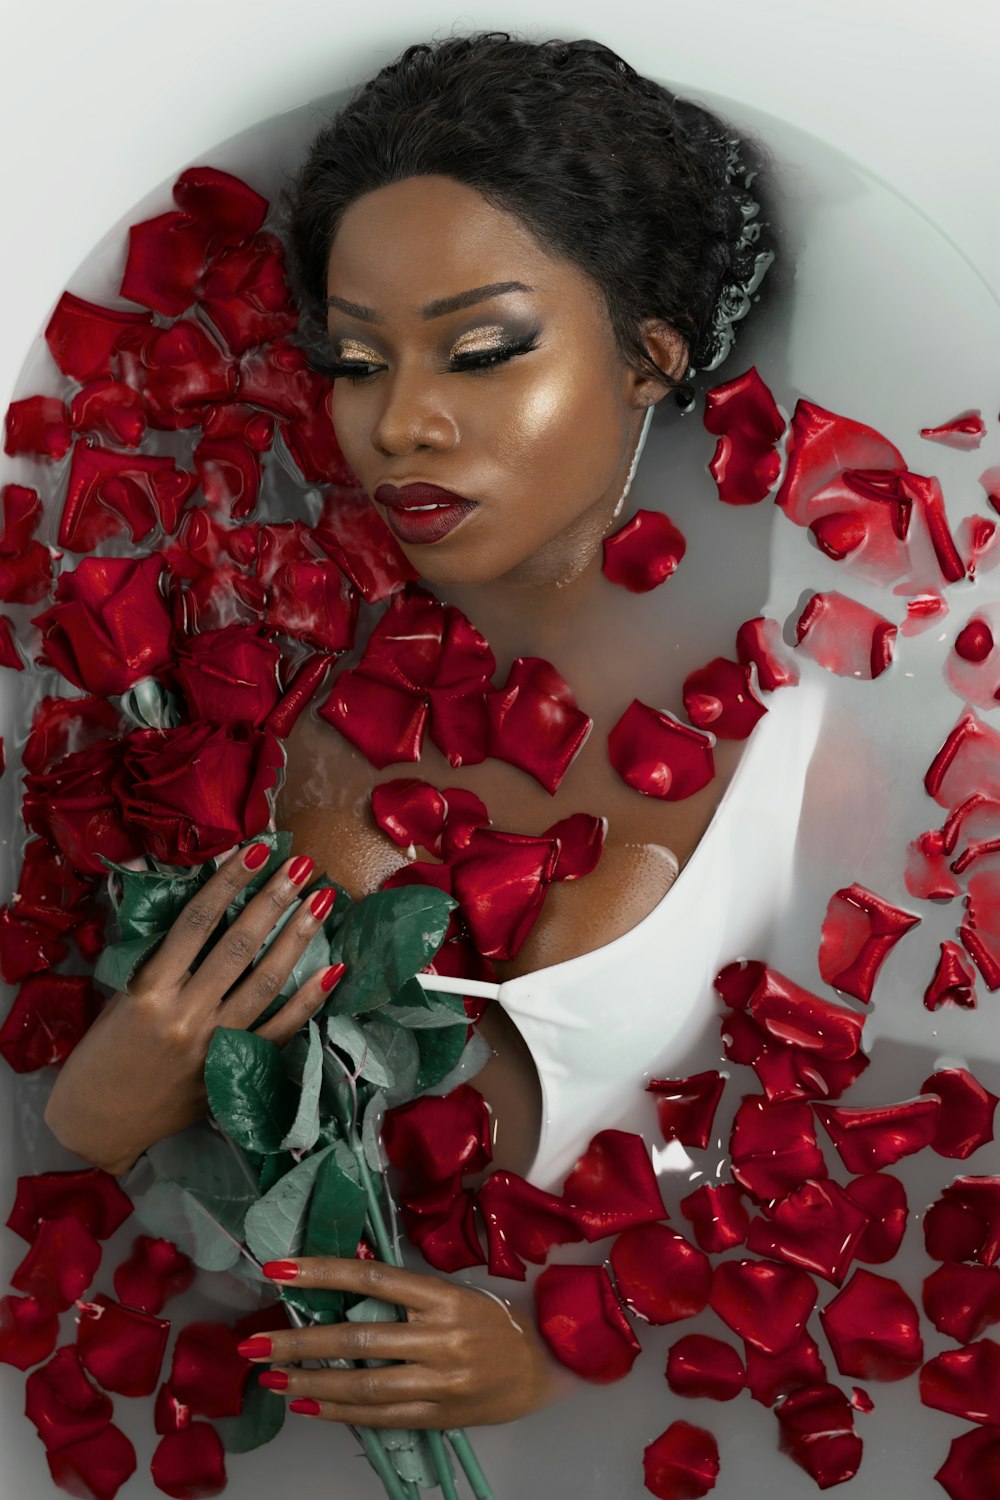 woman in white turtleneck shirt with red rose petals on her face